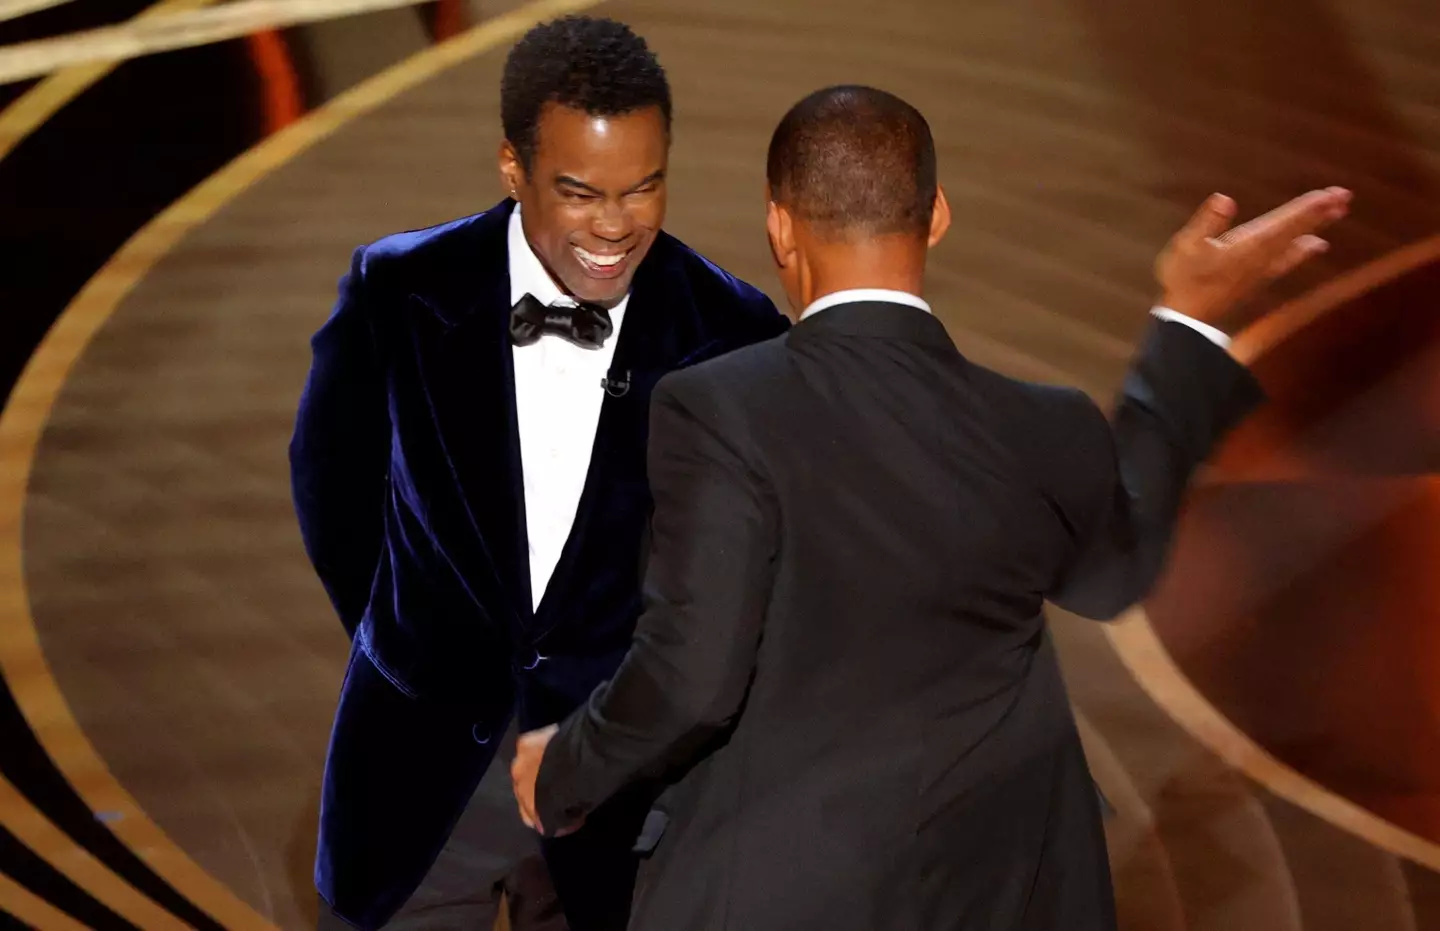 Will Smith slaps Chris Rock on stage during the 94th Academy Awards.